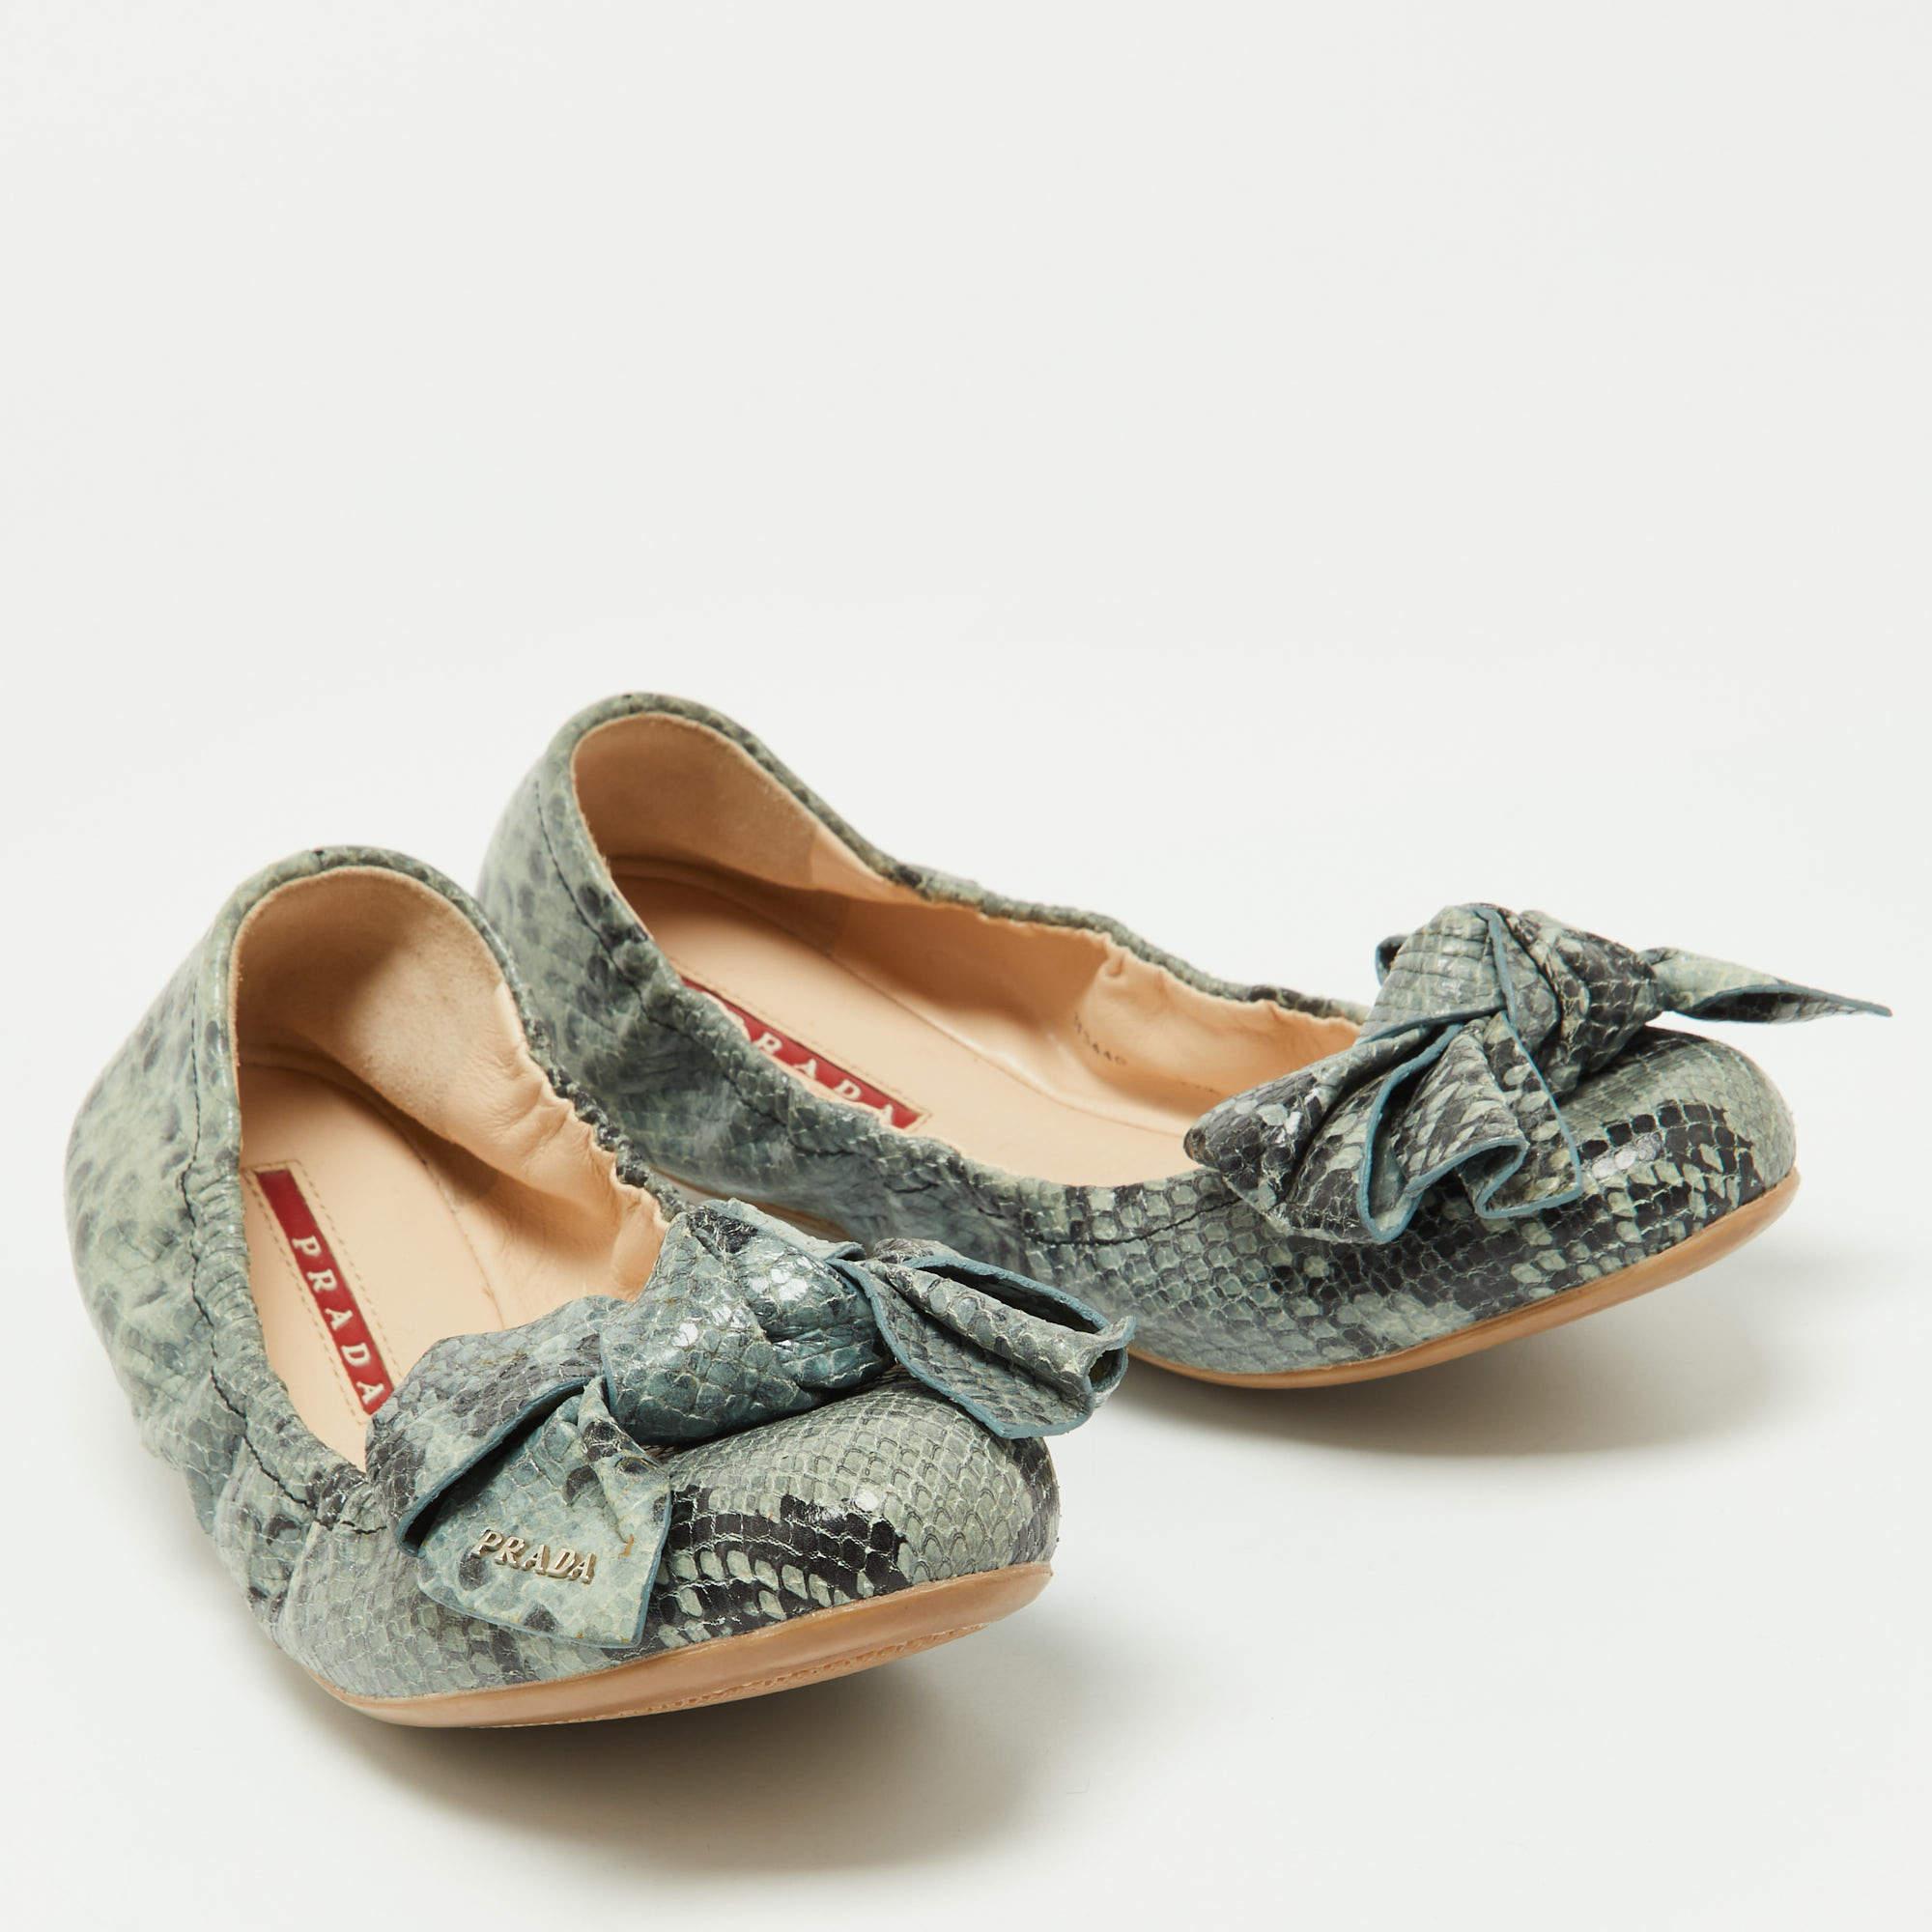 Prada Blue Python Embossed Leather Scrunch Bow Ballet Flats In Good Condition For Sale In Dubai, Al Qouz 2